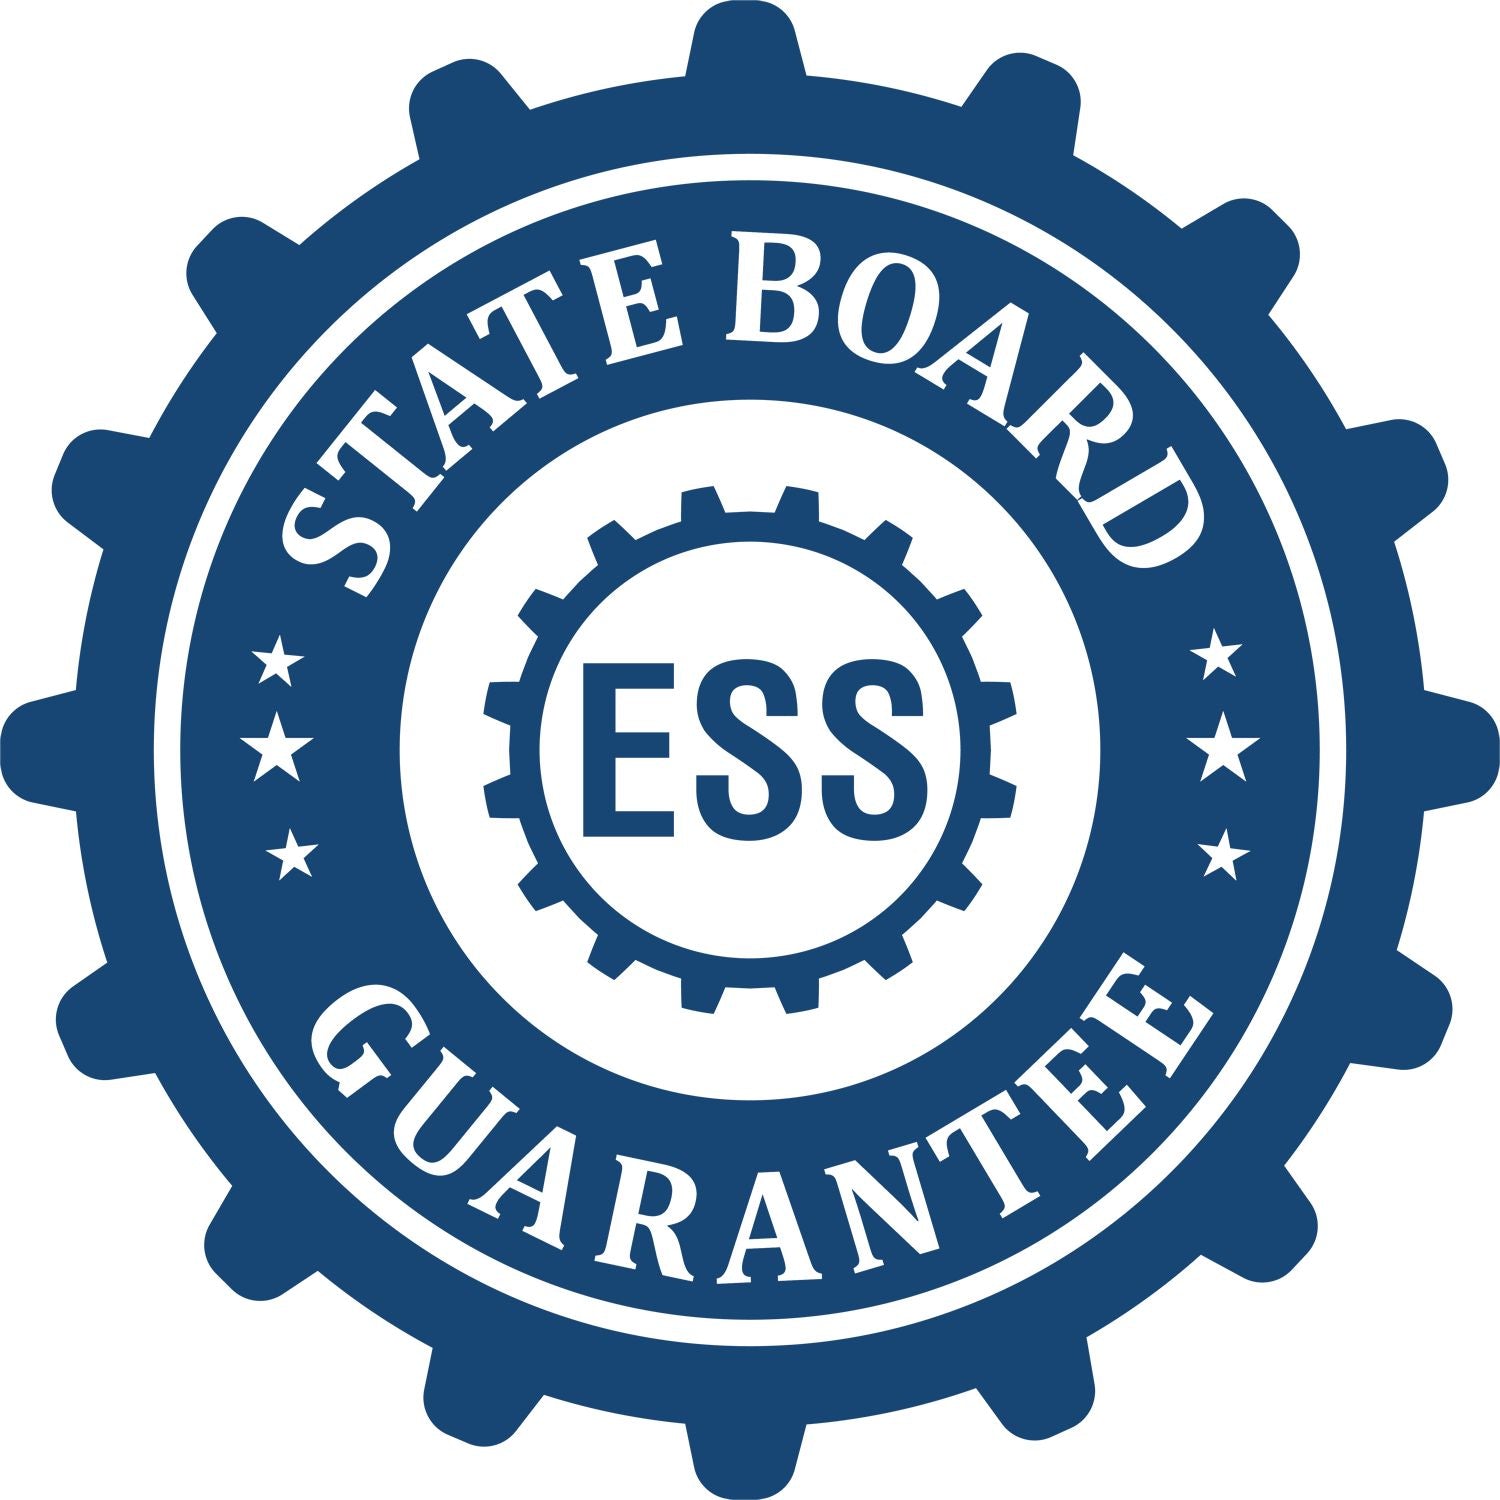 An emblem in a gear shape illustrating a state board guarantee for the Handheld Oklahoma Land Surveyor Seal product.